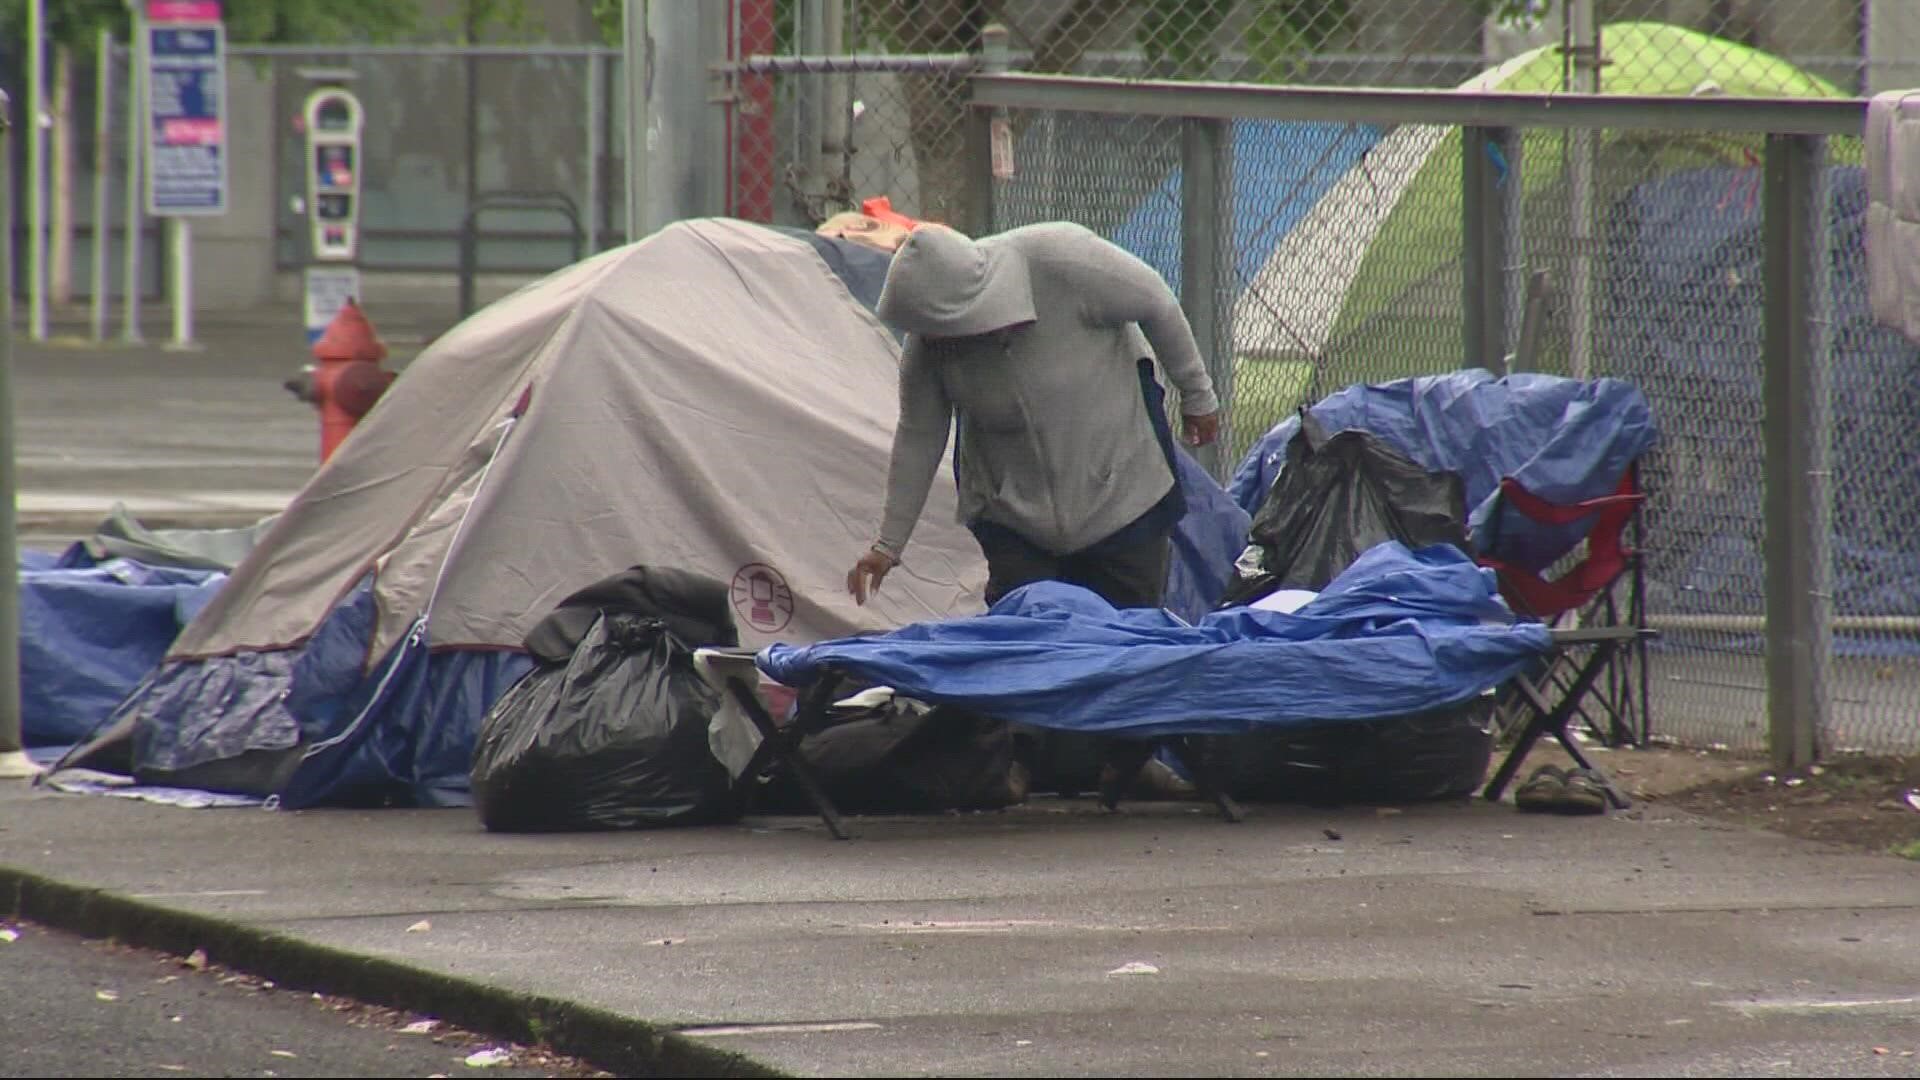 Supplies like tarps and tents typically come from Multnomah County, but nonprofits report that the county has started to limit how much they distribute.